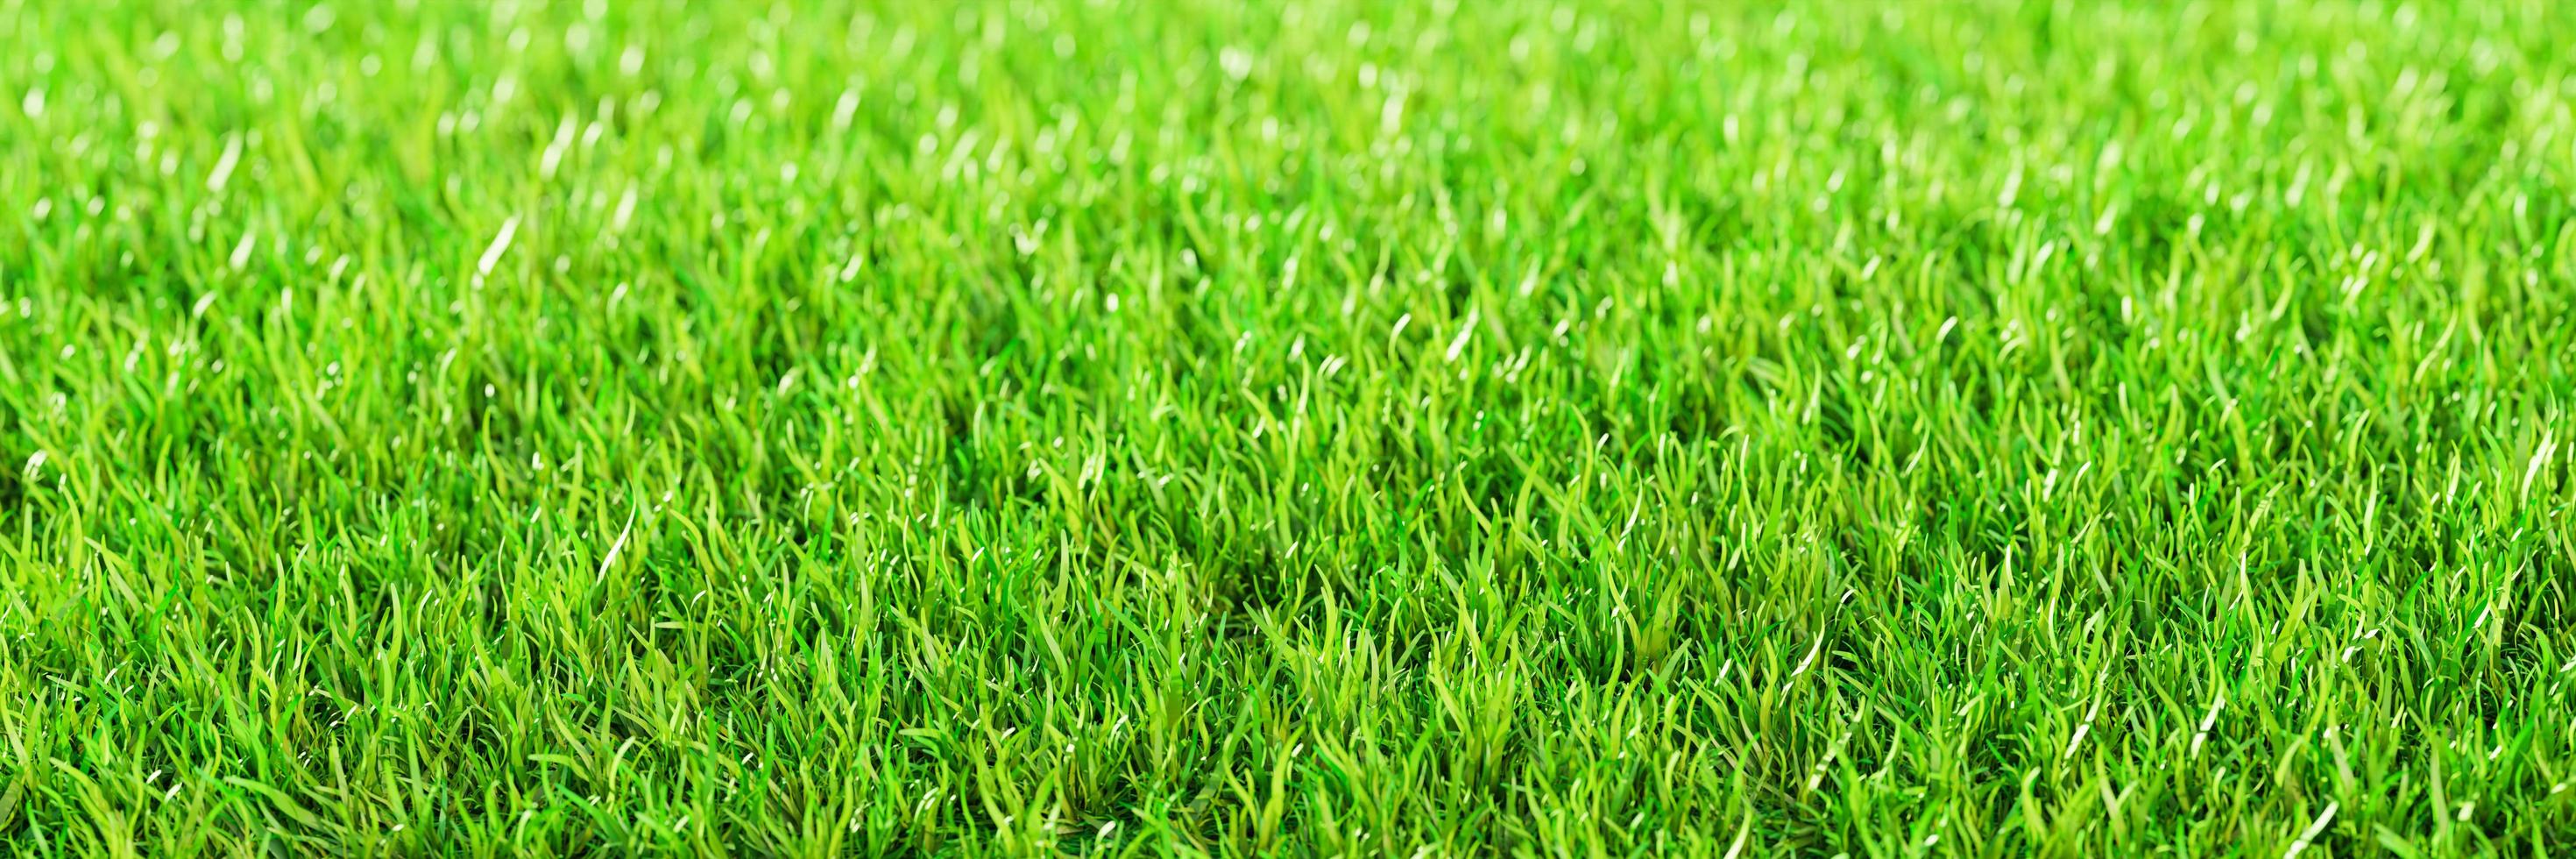 Green grass  Top views Fresh green lawns for background, backdrop, or wallpaper. Plains and grasses of various sizes are neat and tidy. The lawn surface is evenly shining and bright.3D Rendering photo